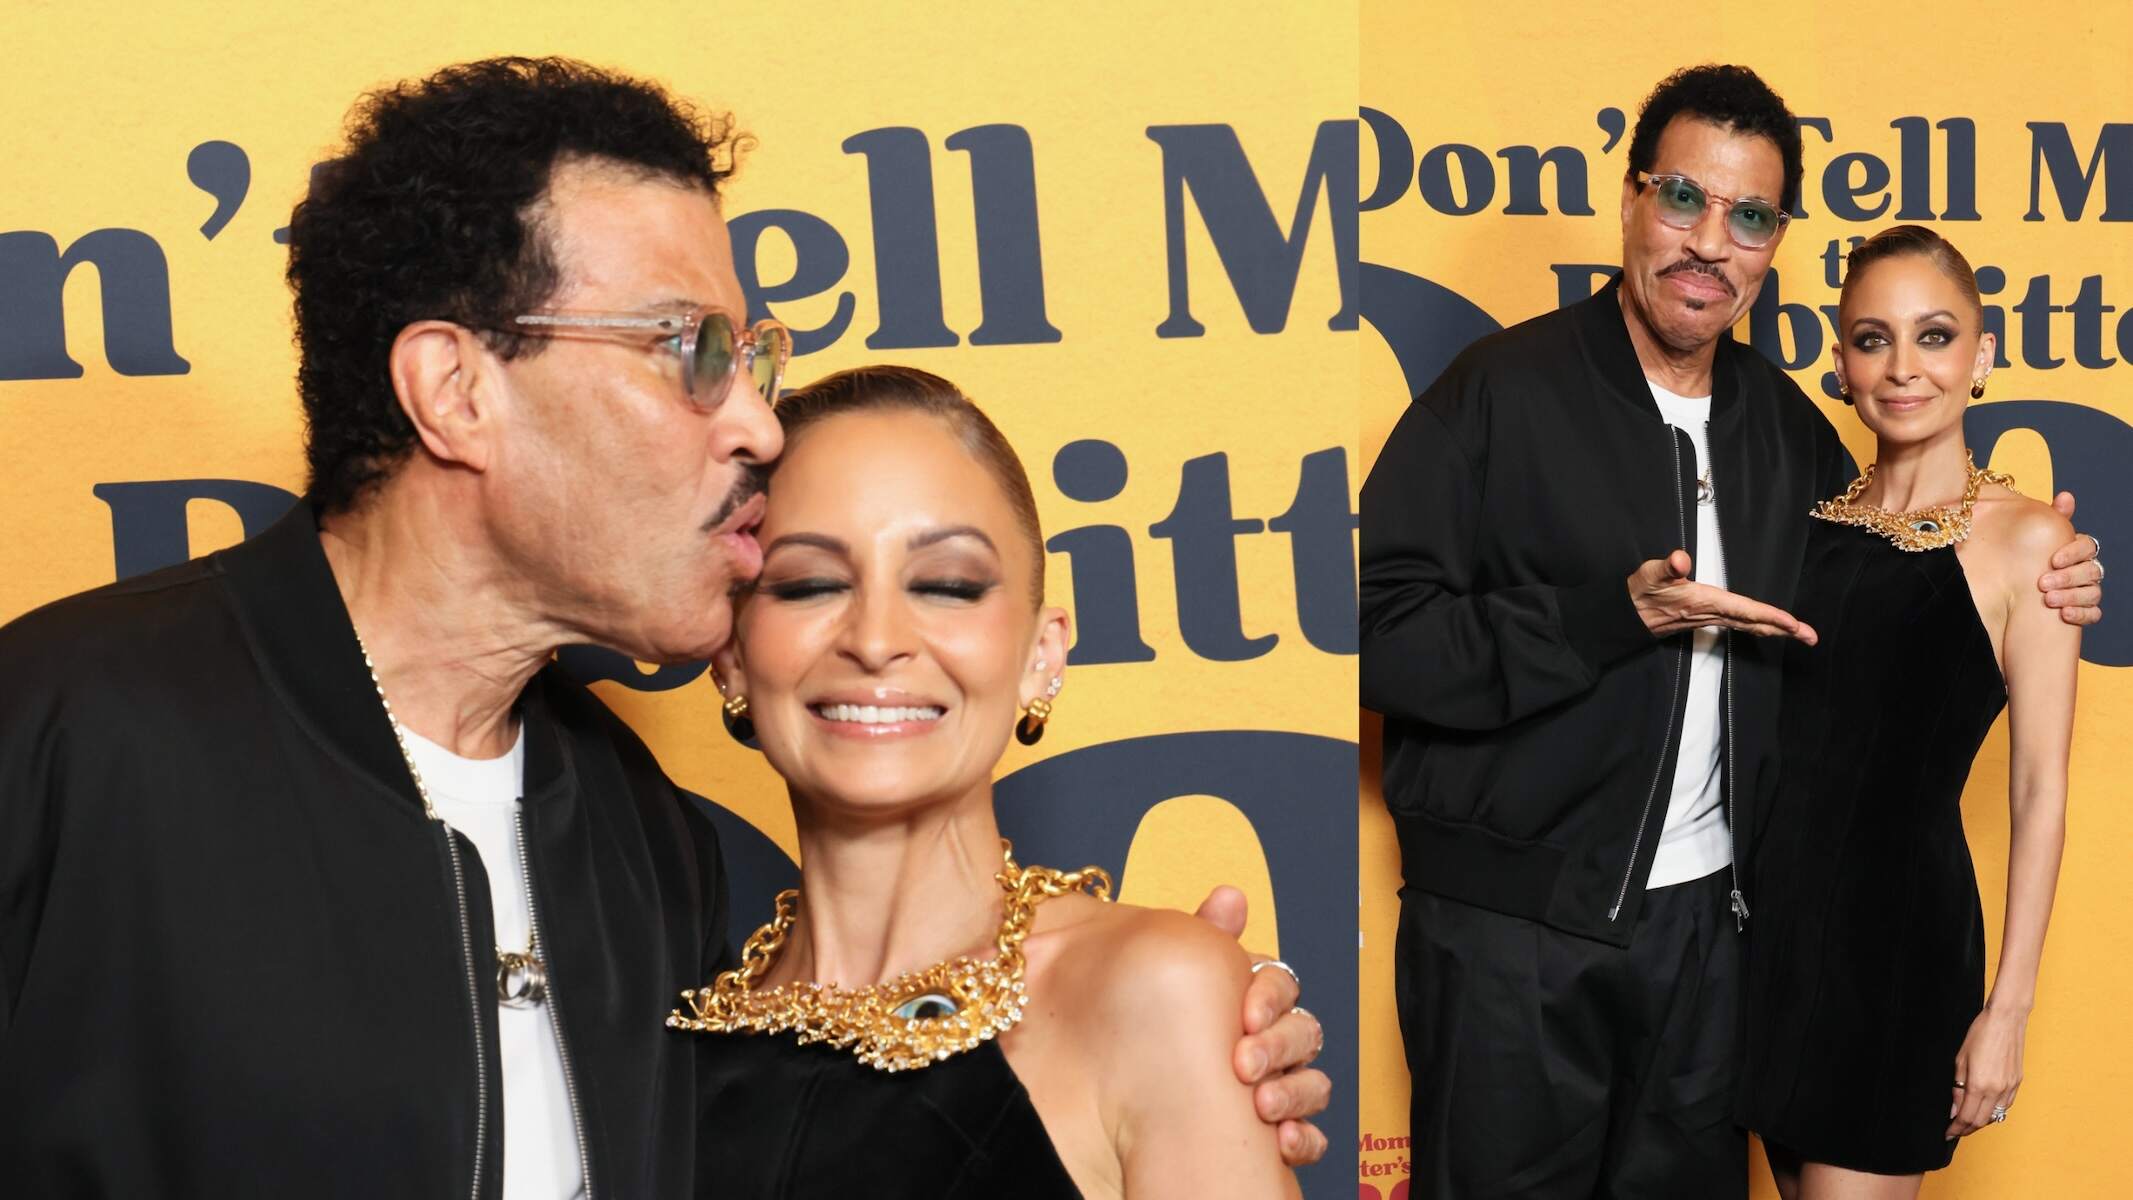 Lionel Richie kisses Nicole Richie on the temple as they laugh together on the red carpet at the 'Don't Tell Mom the Babysitter's Dead' premiere